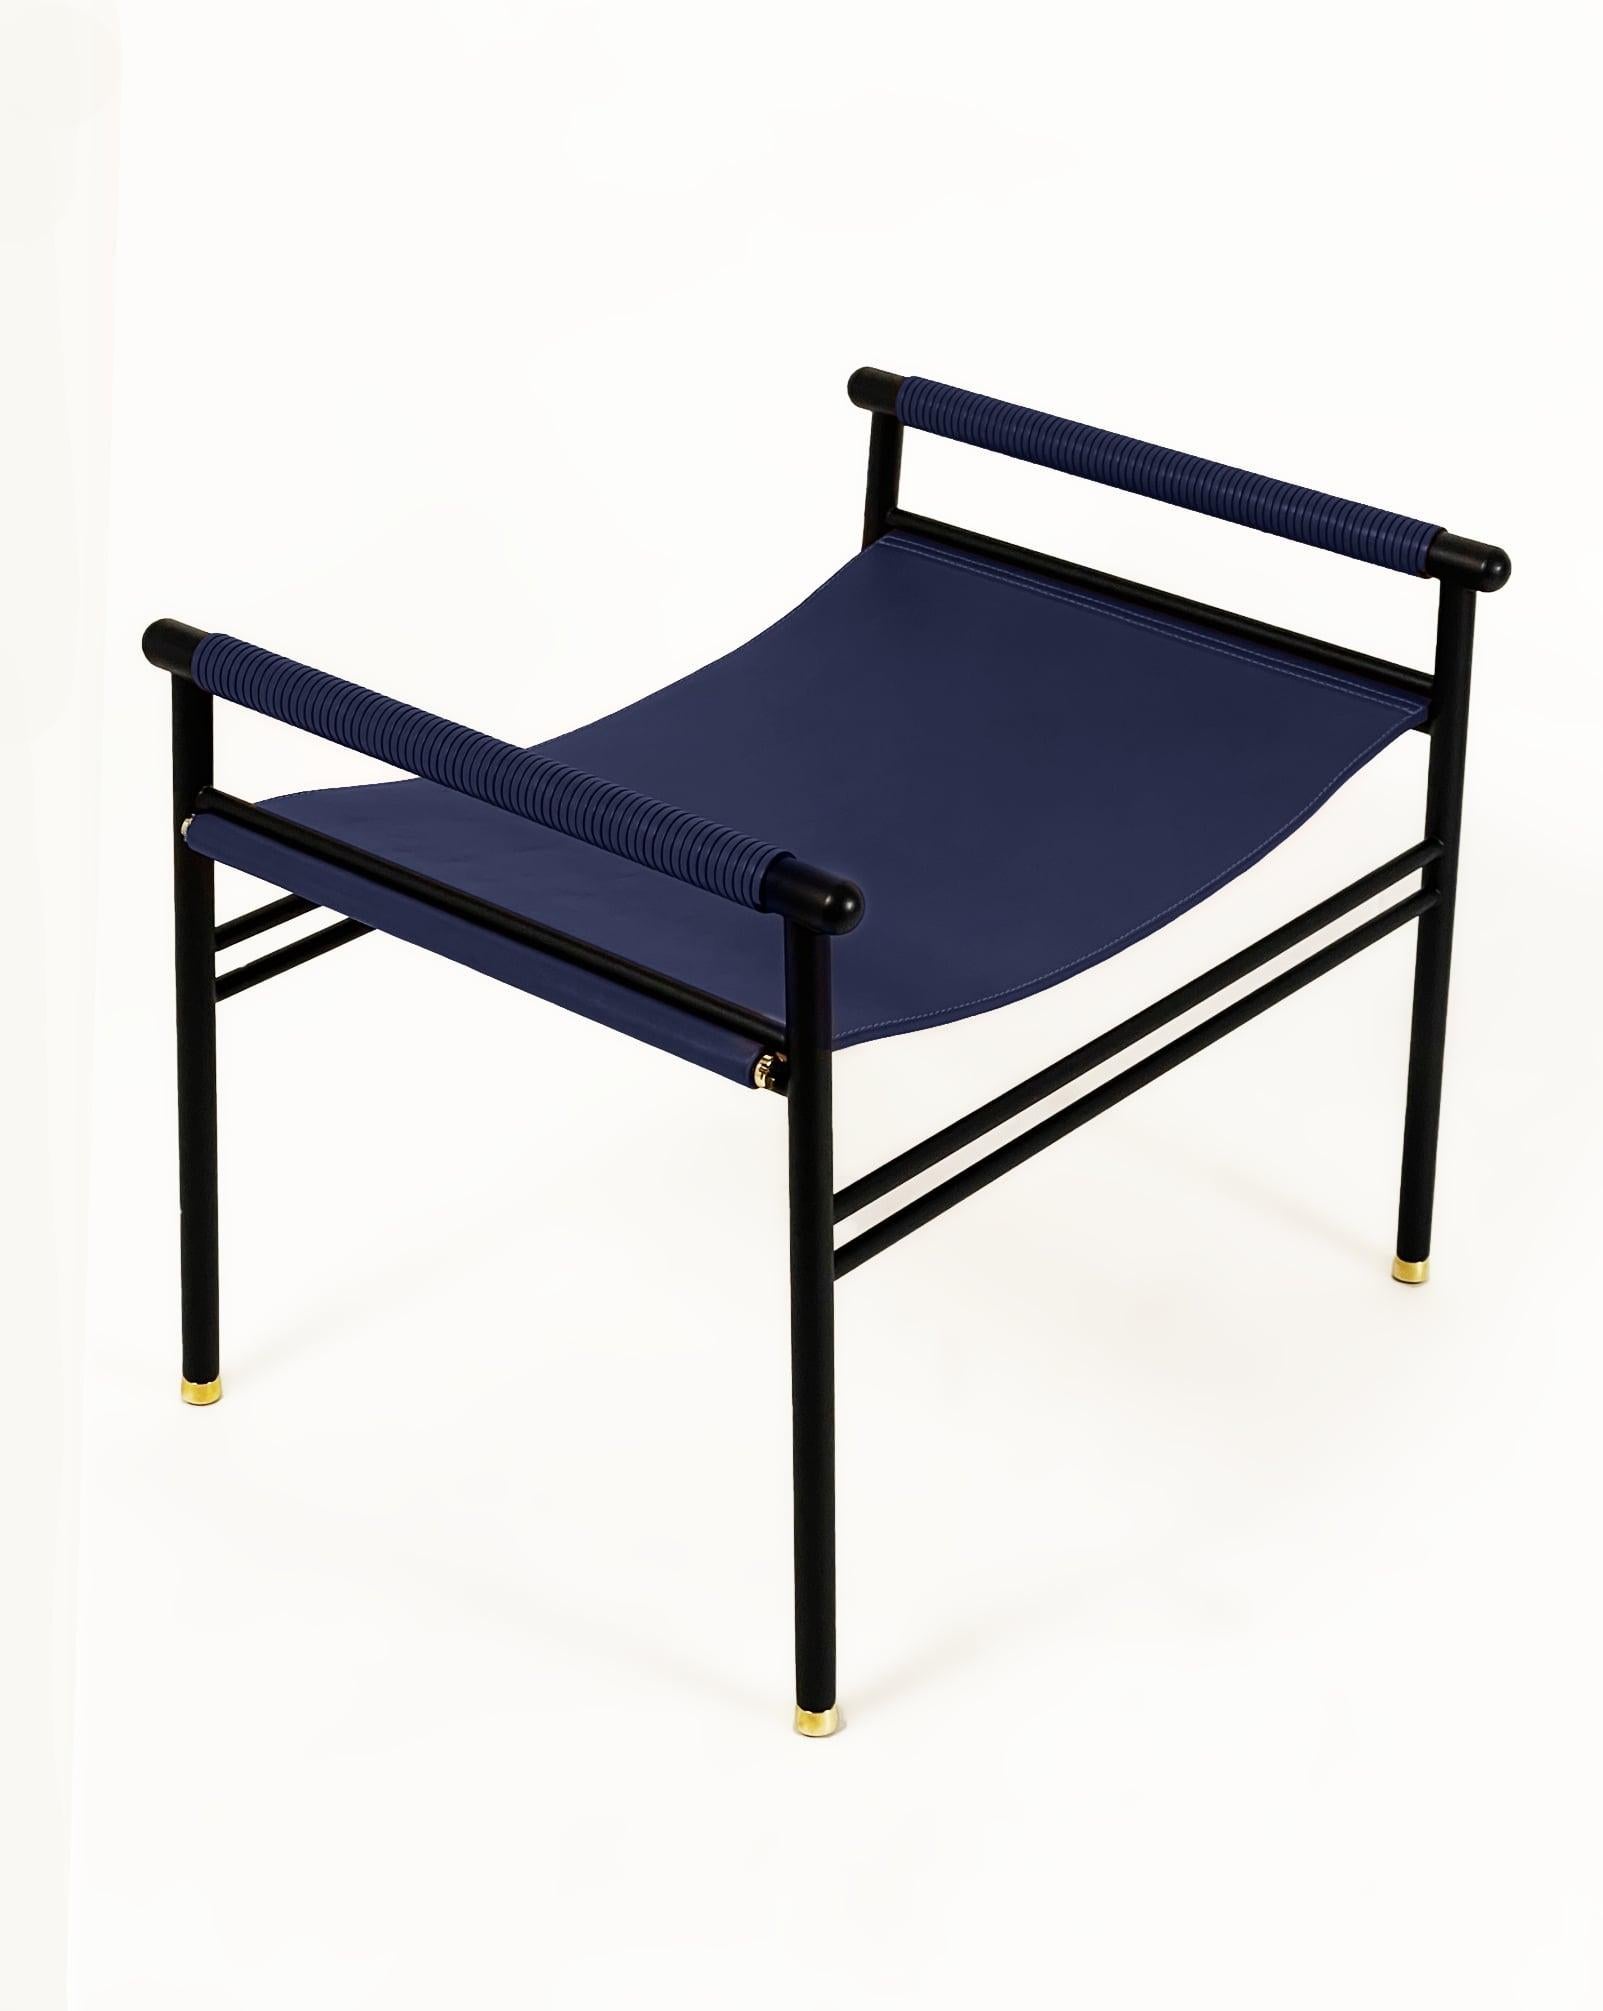 Spanish Contemporary Repose Ottoman Footstool Black Smoke Steel & Navy Blue Leather  For Sale